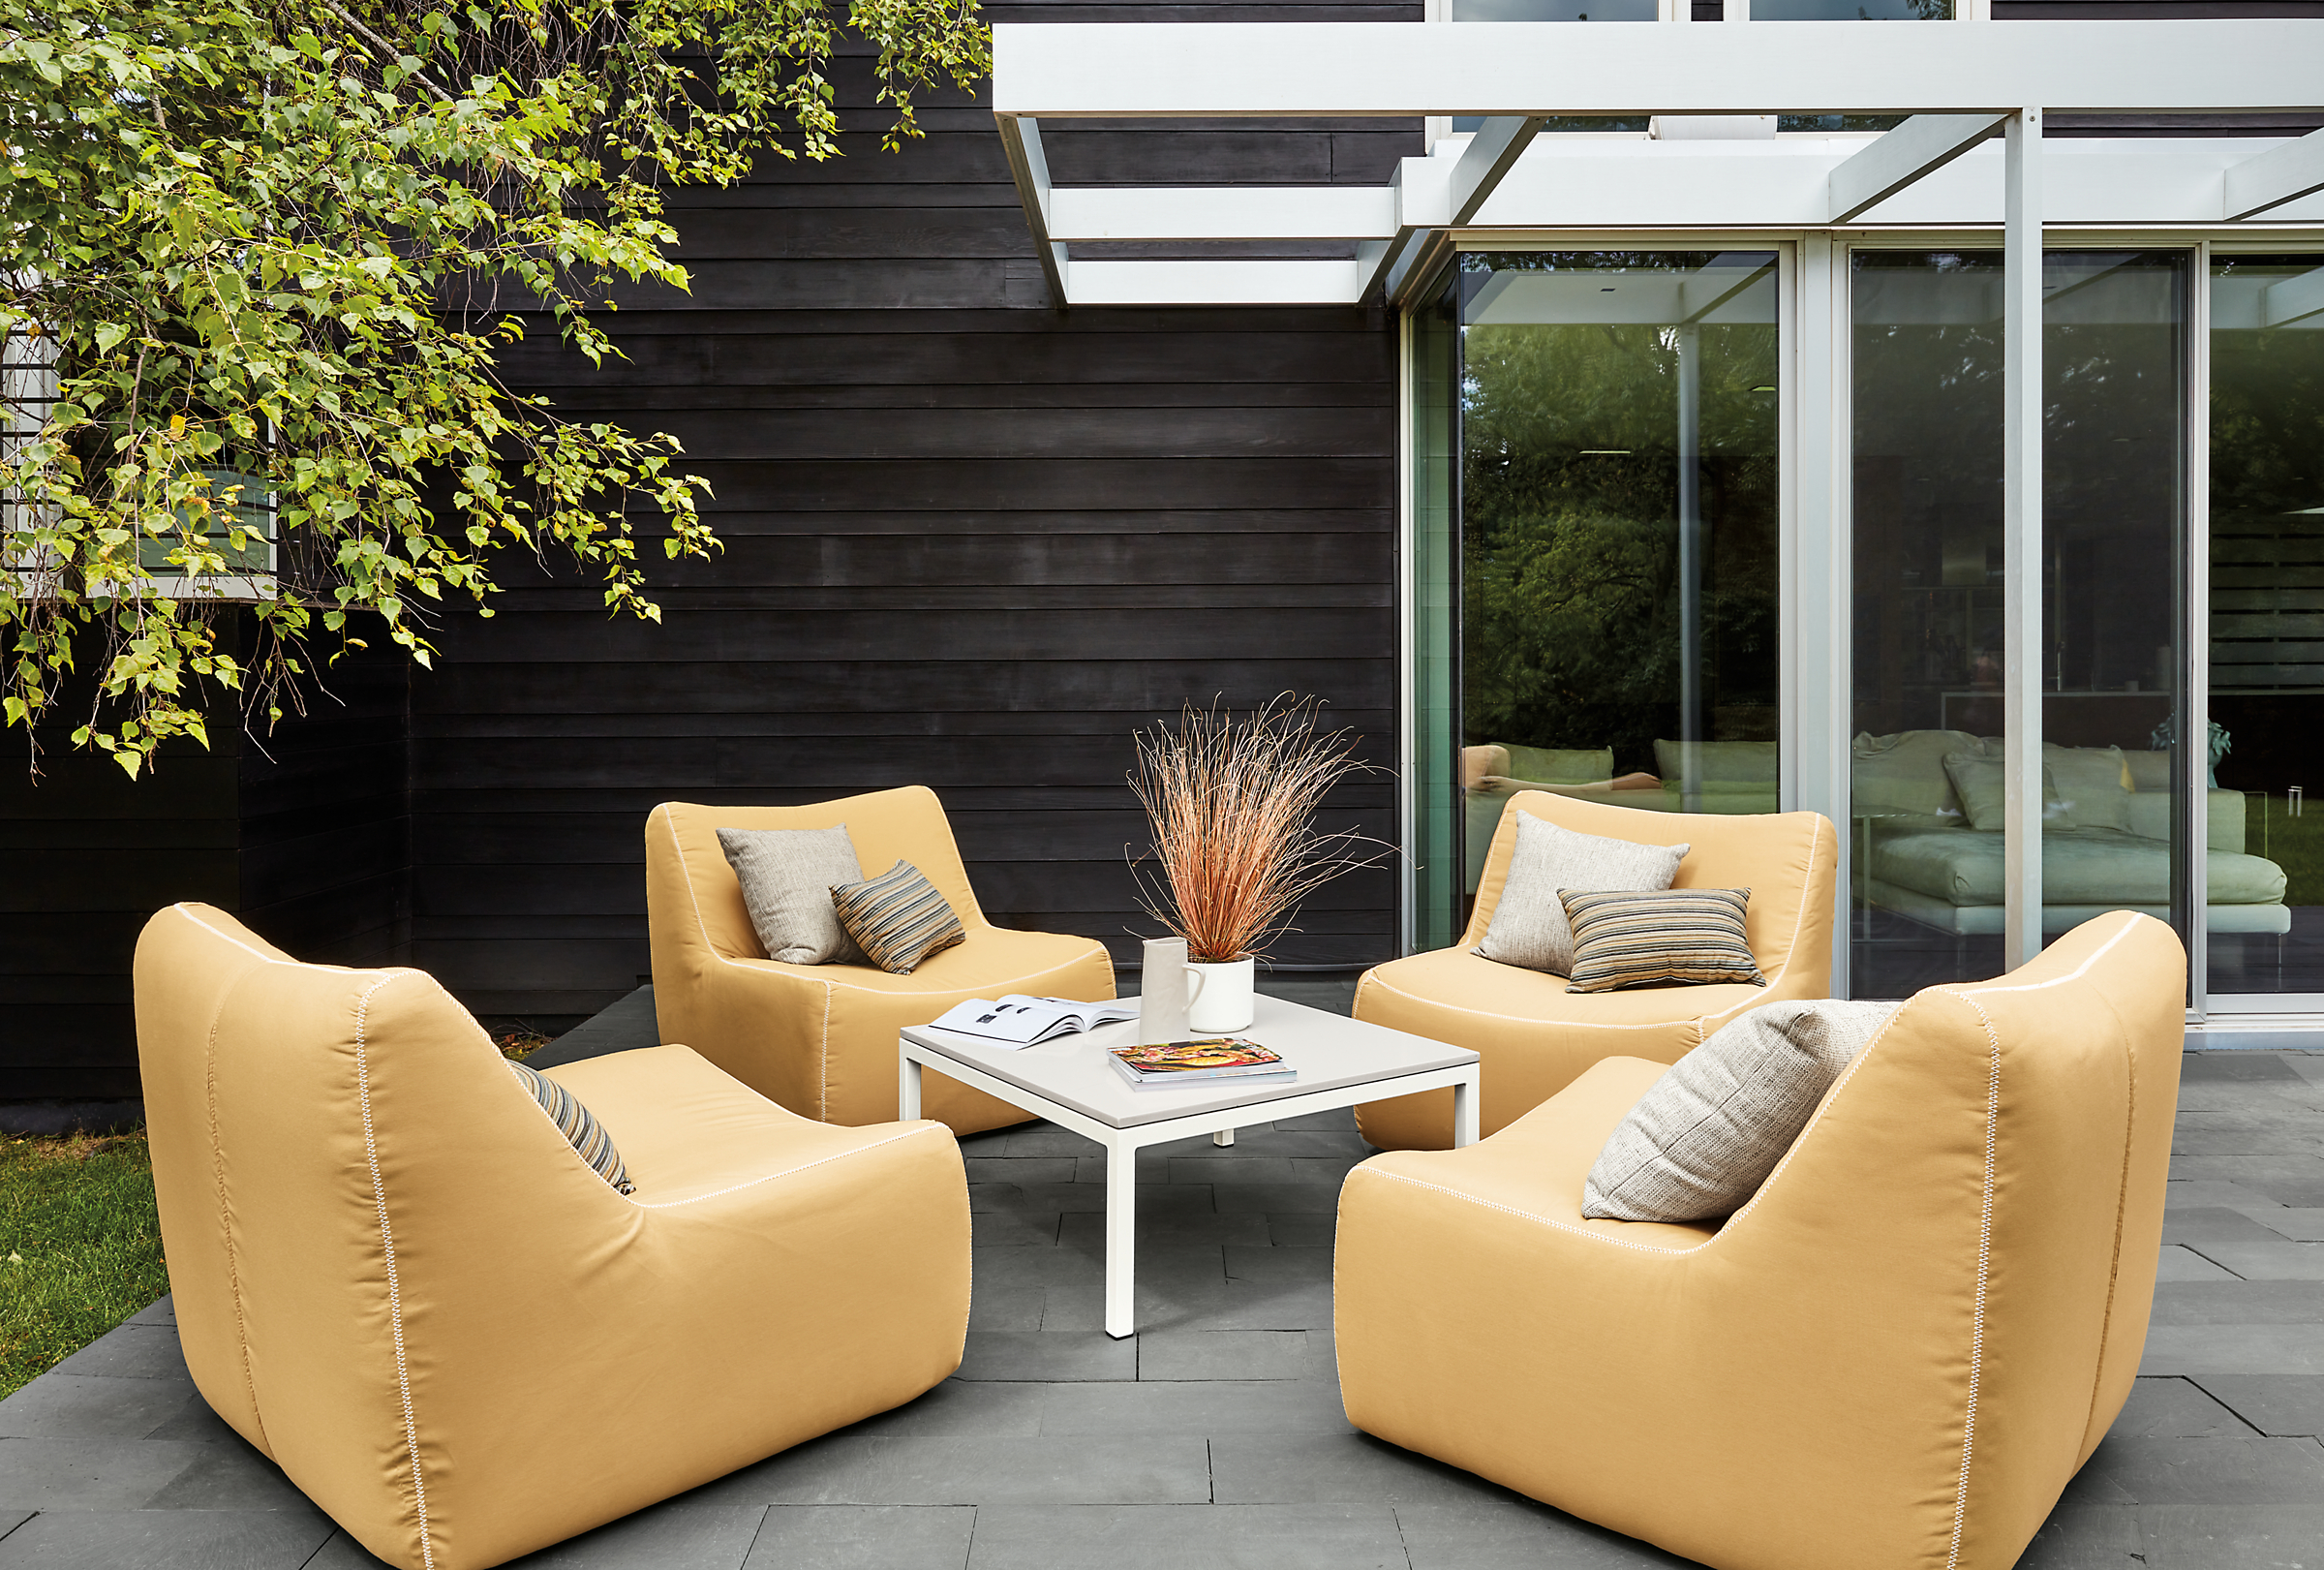 Outdoor setting with 4 Maya Swivel Chairs in Sunbrella Canvas Saffron and a Parsons 36 inch square outdoor coffee table.